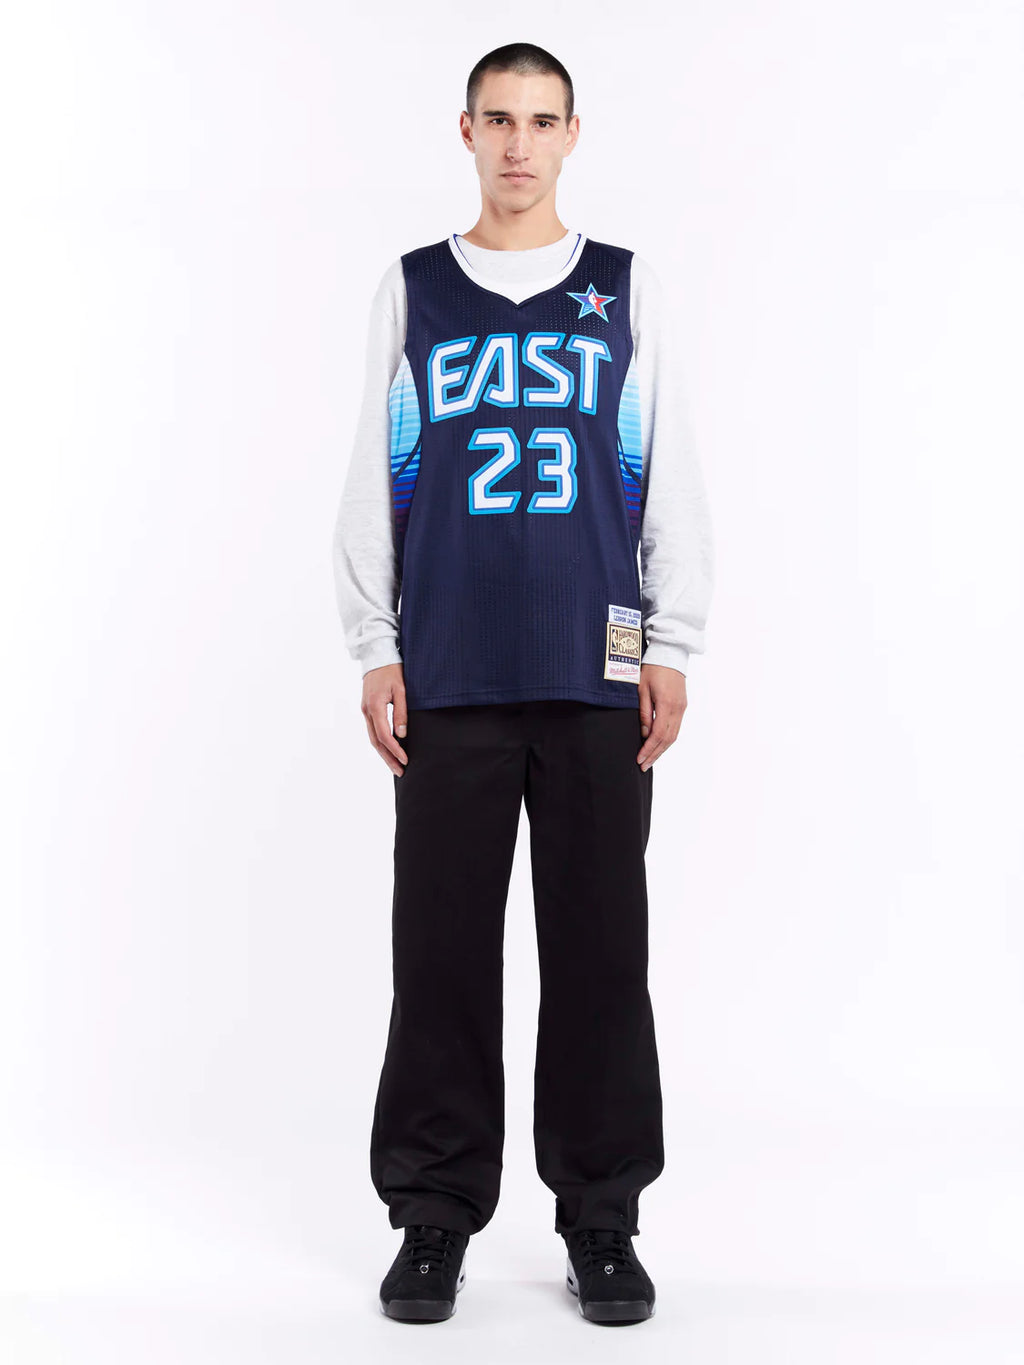 Authentic Jersey All-Star East 2009 Lebron James - Shop Mitchell & Ness  Authentic Jerseys and Replicas Mitchell & Ness Nostalgia Co.